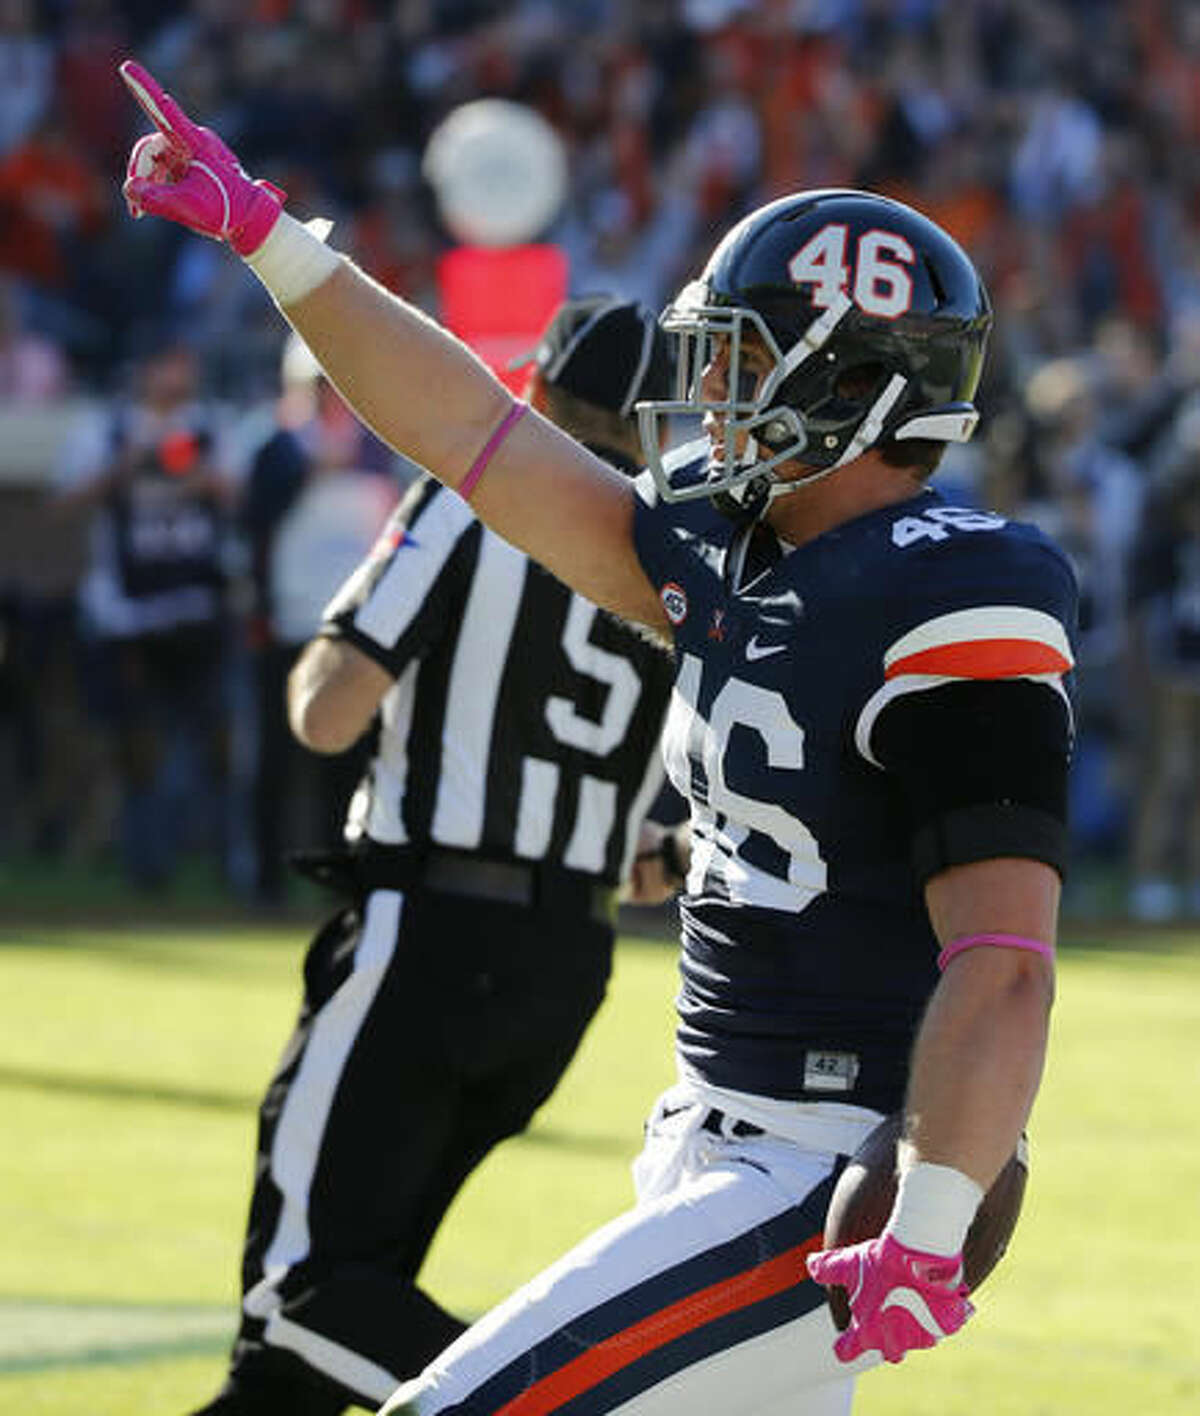 Virginia tight end Evan Butts (46) celebrates a touchdown catch during the first half of an NCAA college football game between North Carolina and Virginia at Scott stadium in Charlottesville, Va., Saturday, Oct. 22, 2016. (AP Photo/Steve Helber)